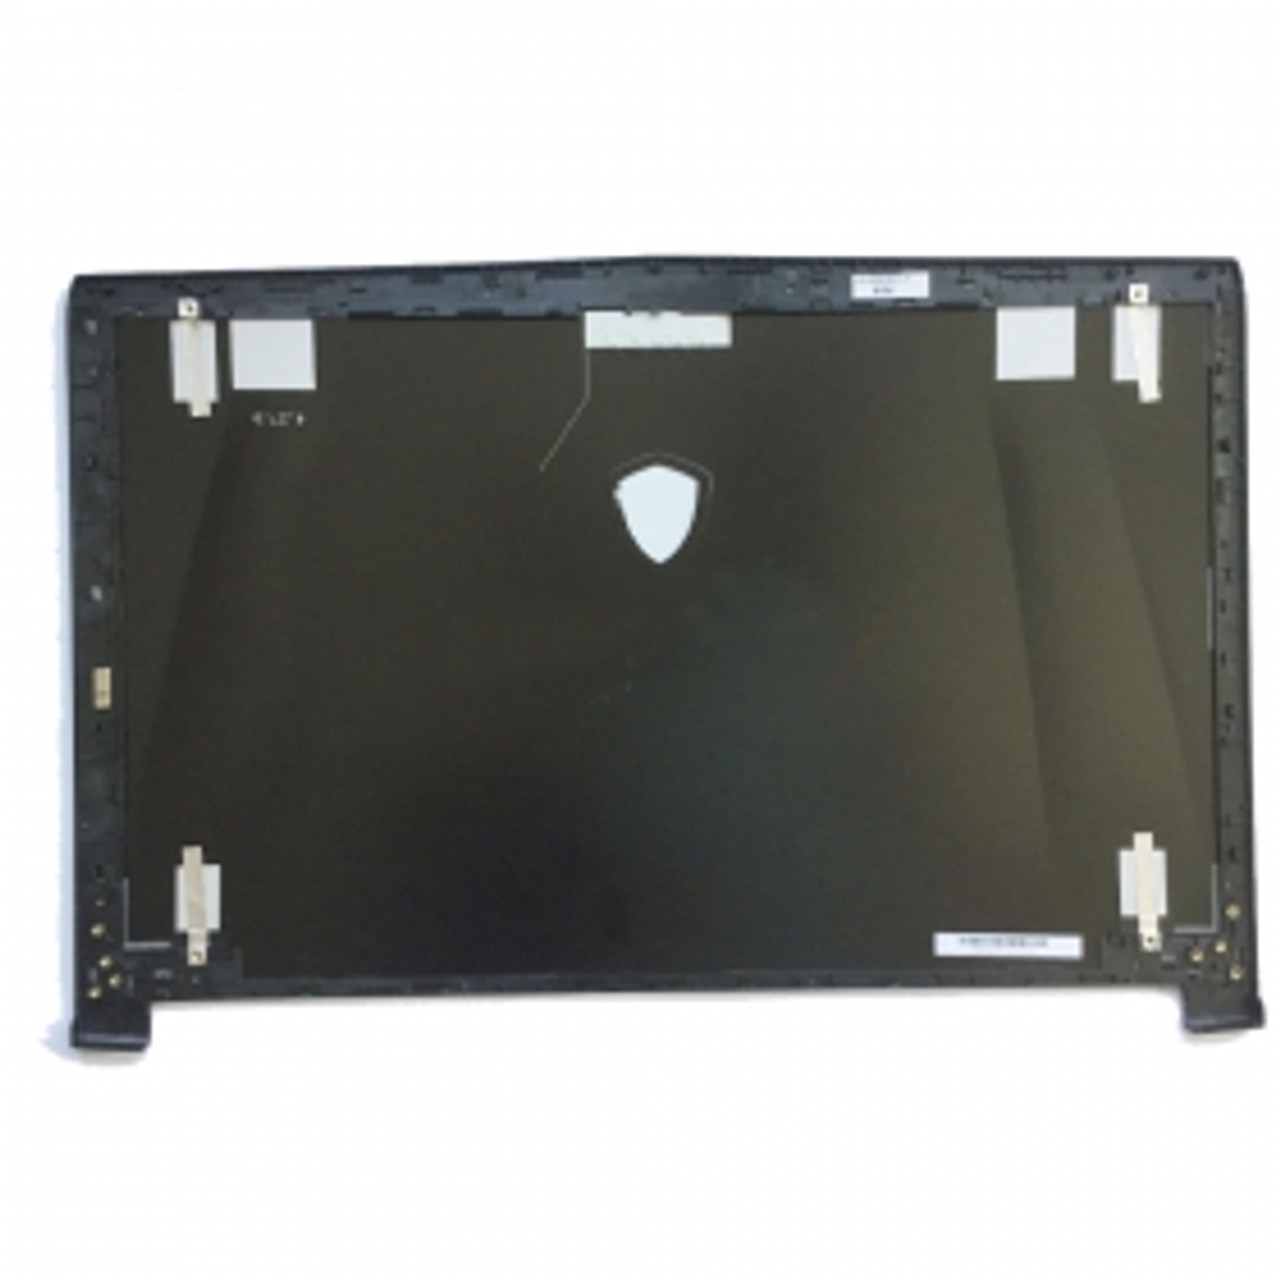 Laptop Top Cover for MSI GE72 GE72 6QF 307791A222Y311 Thick Screen New and Original